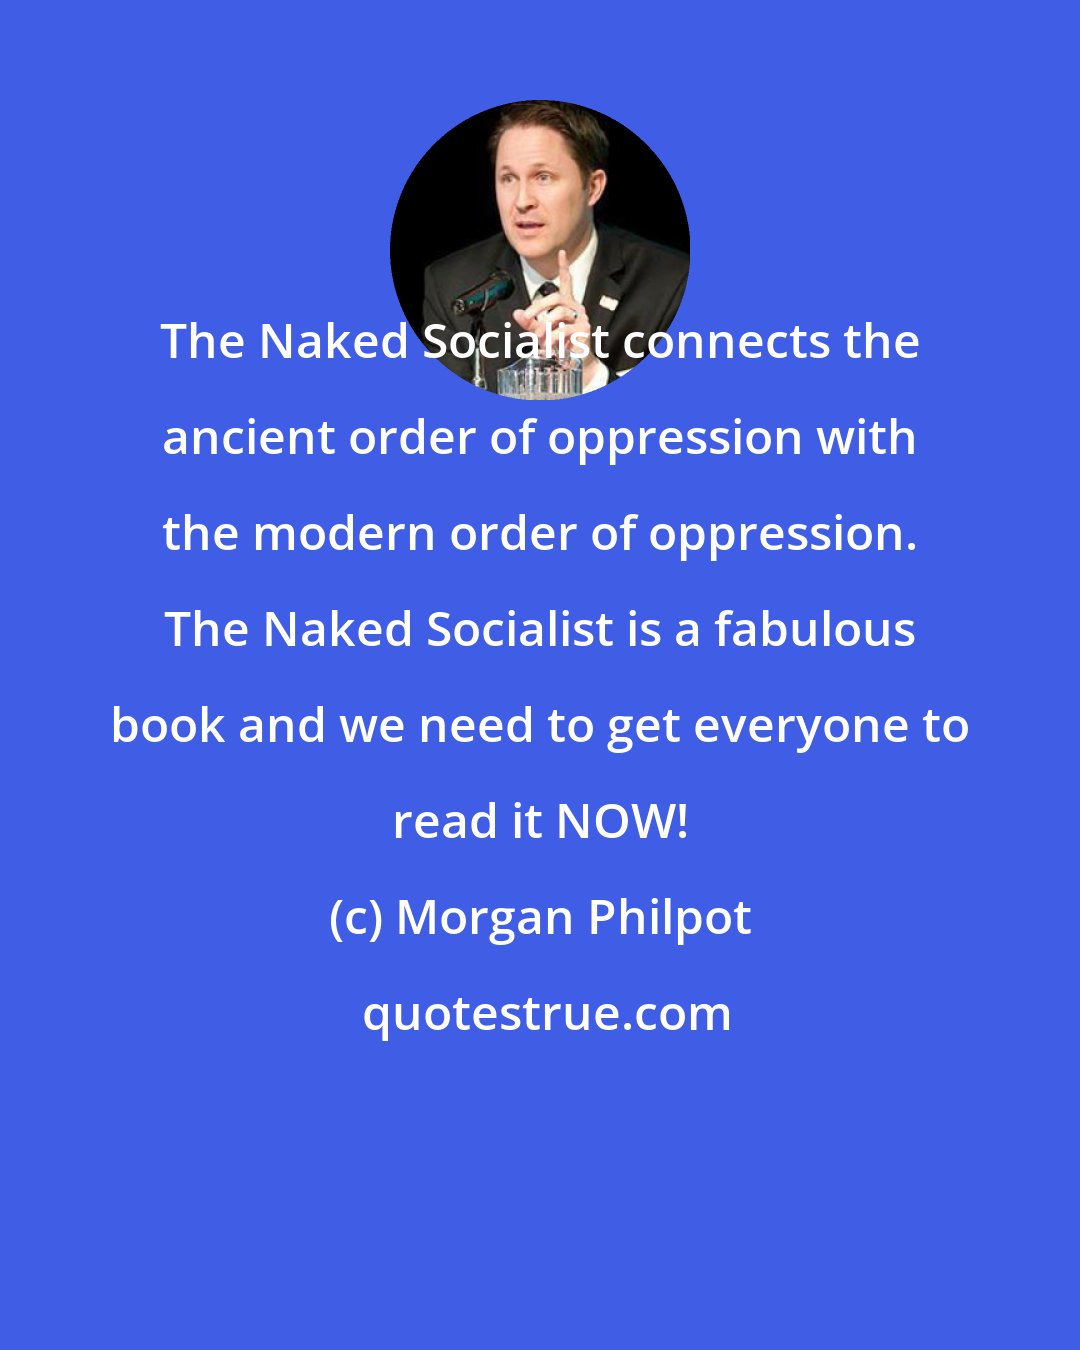 Morgan Philpot: The Naked Socialist connects the ancient order of oppression with the modern order of oppression. The Naked Socialist is a fabulous book and we need to get everyone to read it NOW!